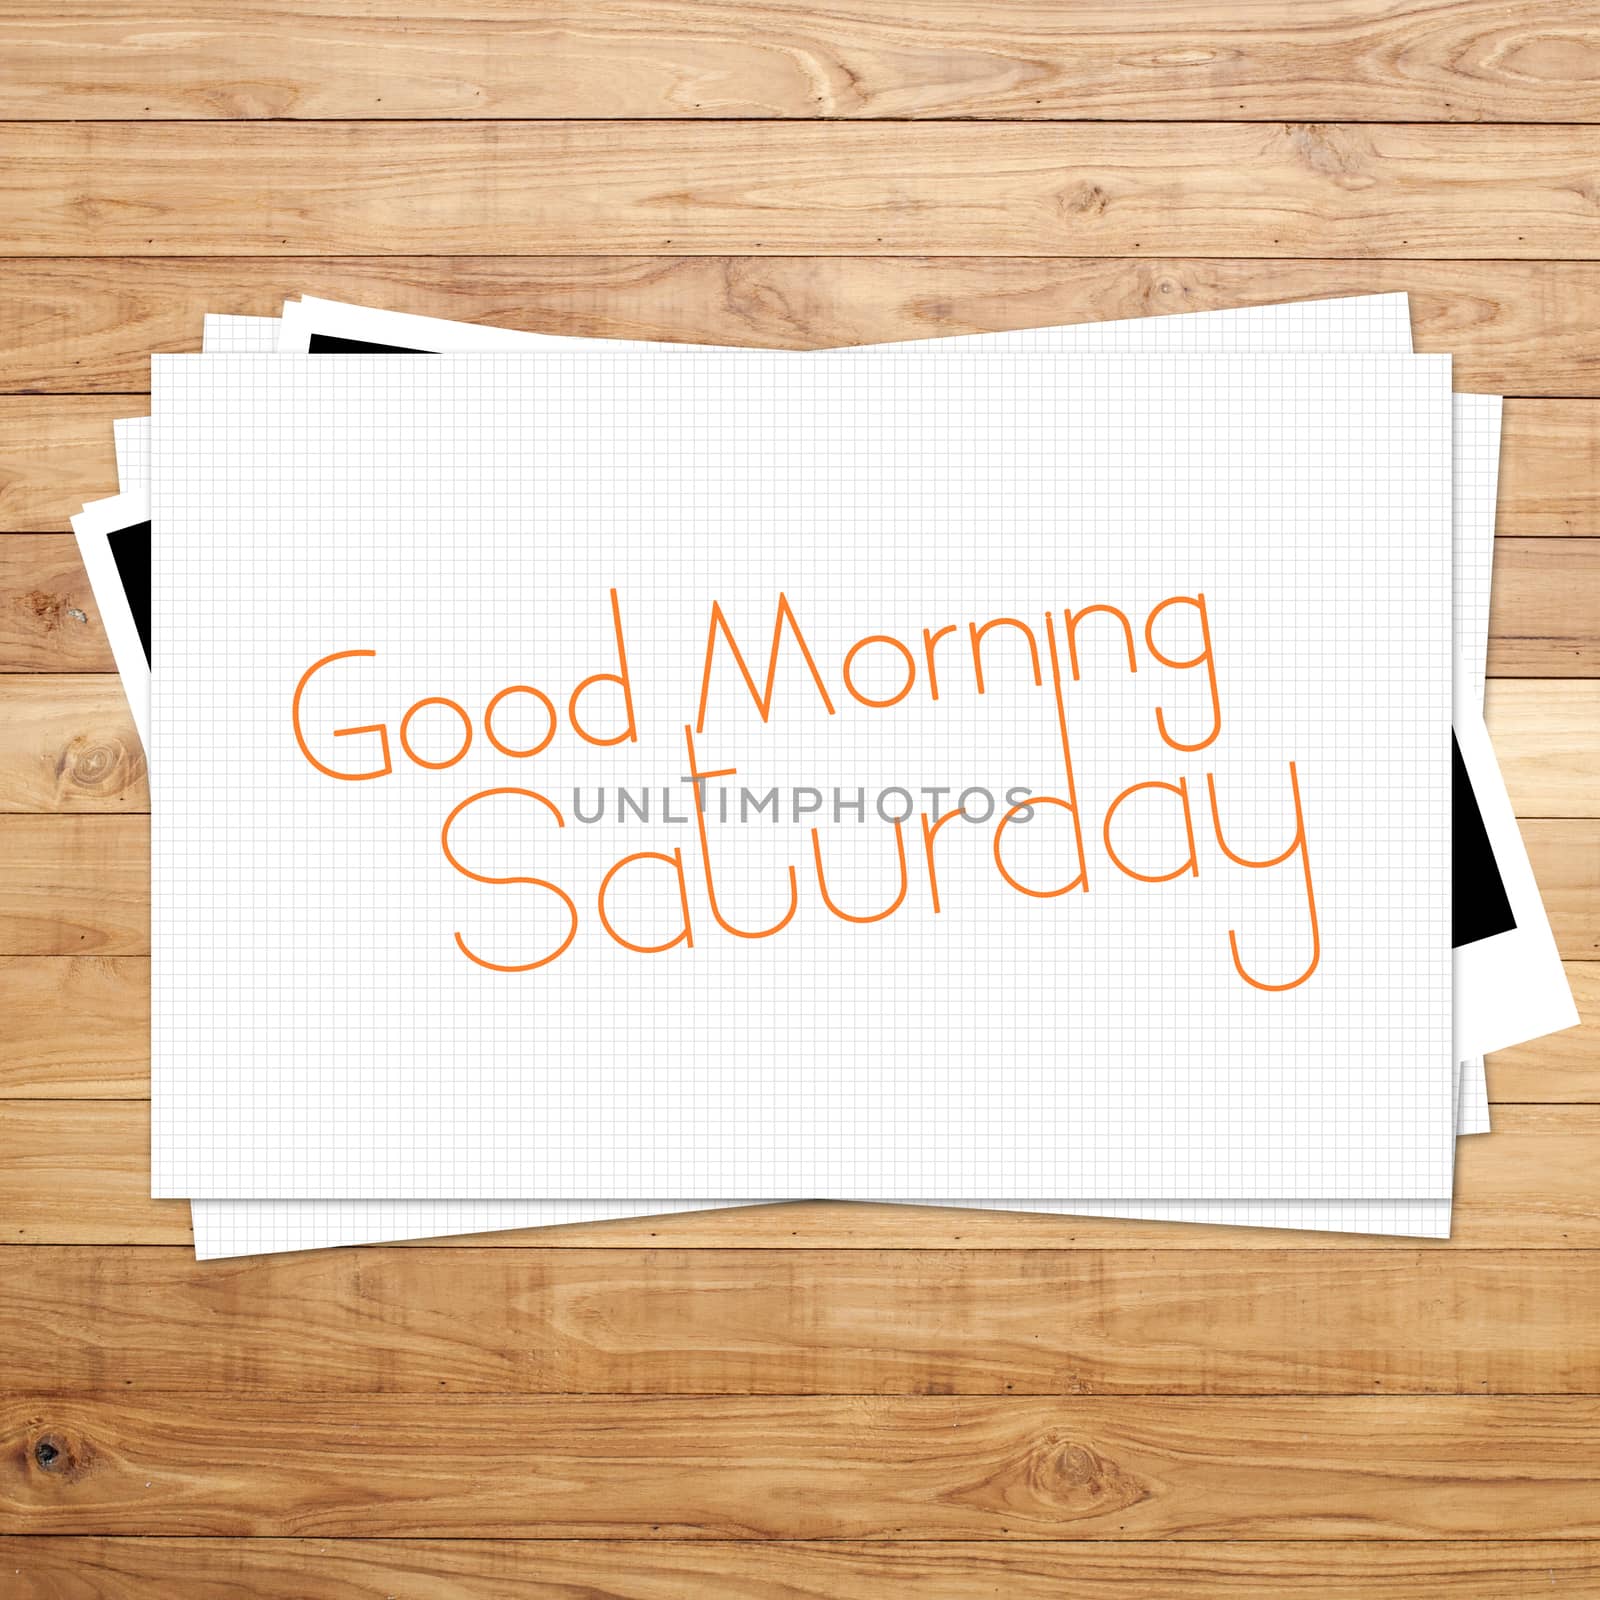 Good Morning Saturday on paper and Brown wood plank background